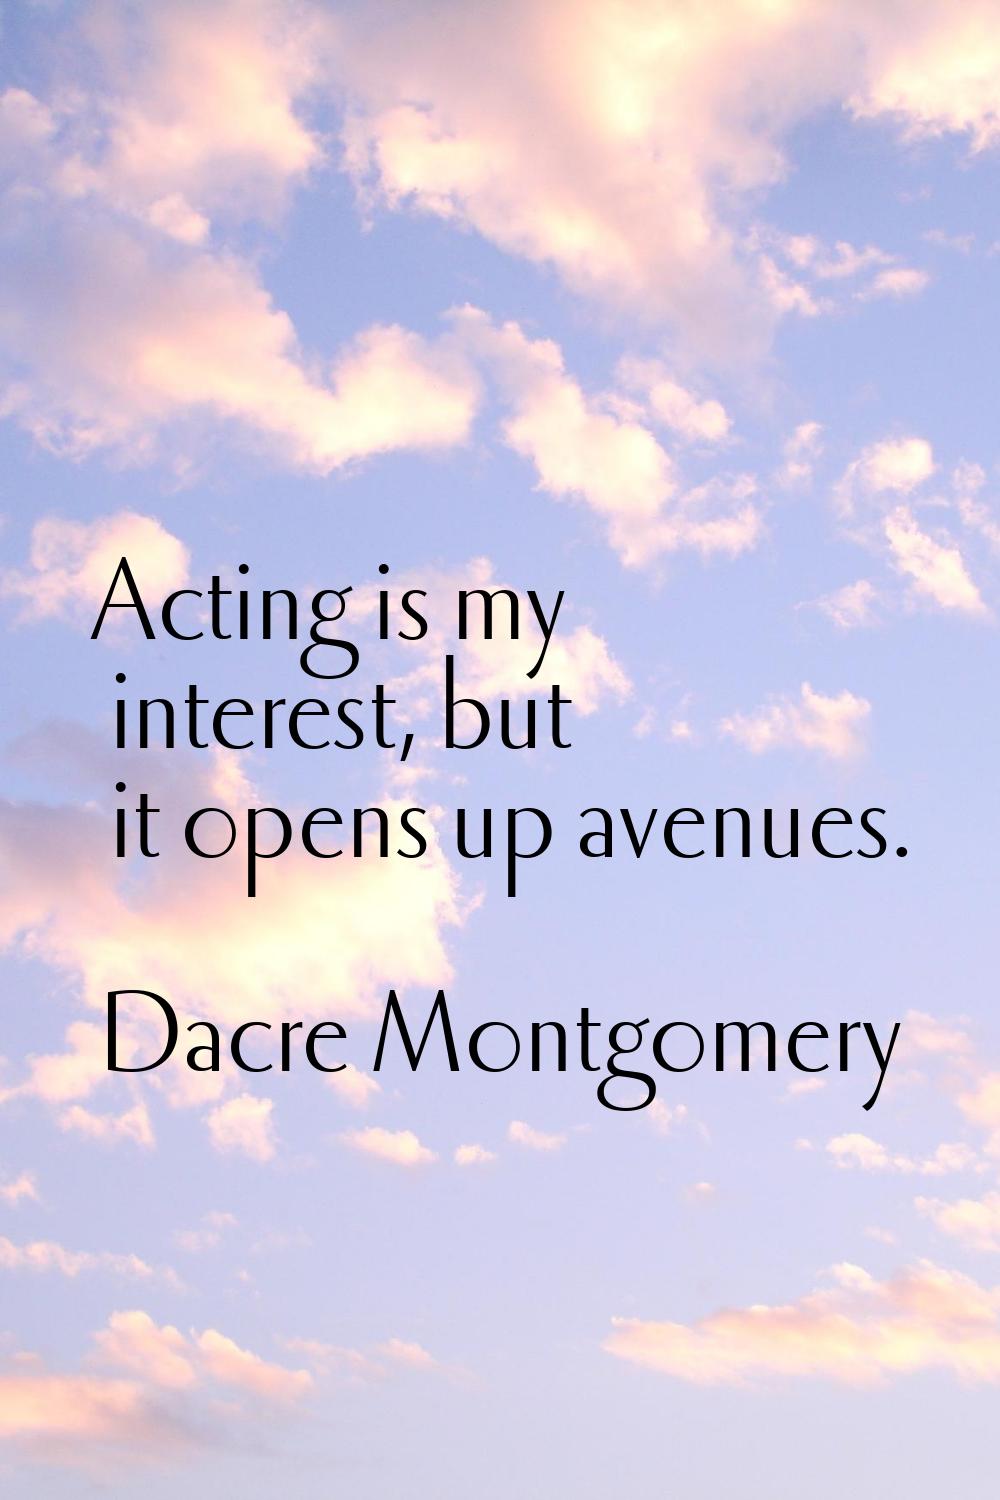 Acting is my interest, but it opens up avenues.